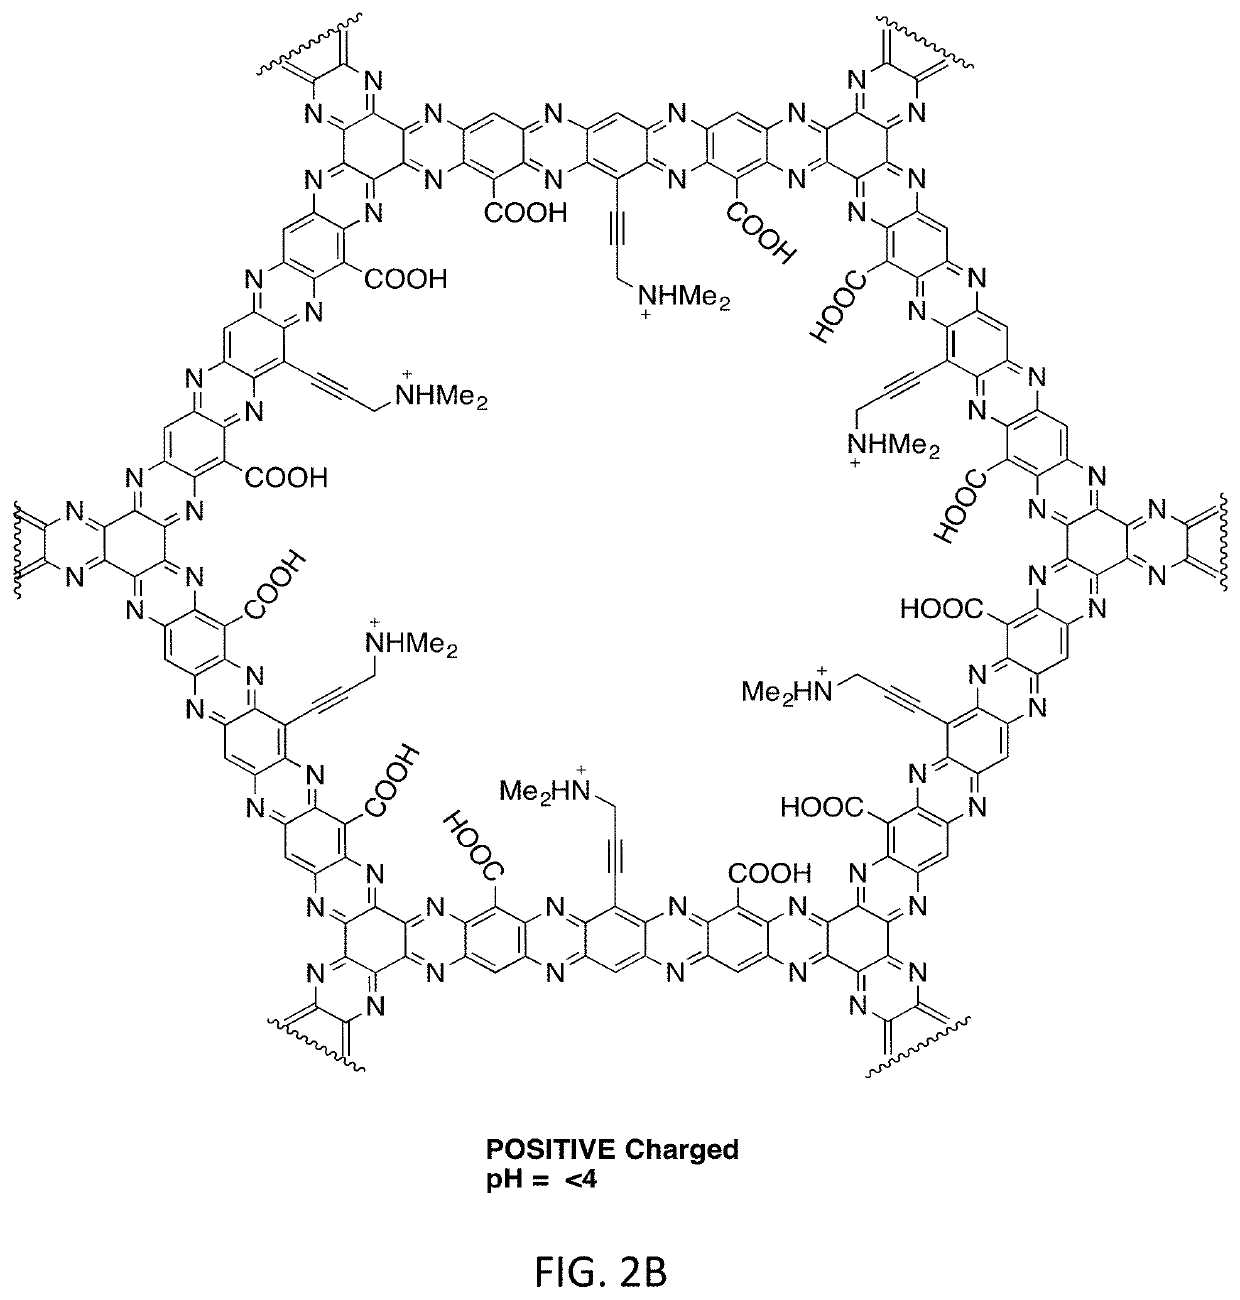 Control of composite covalent organic framework by varying functional groups inside the pore